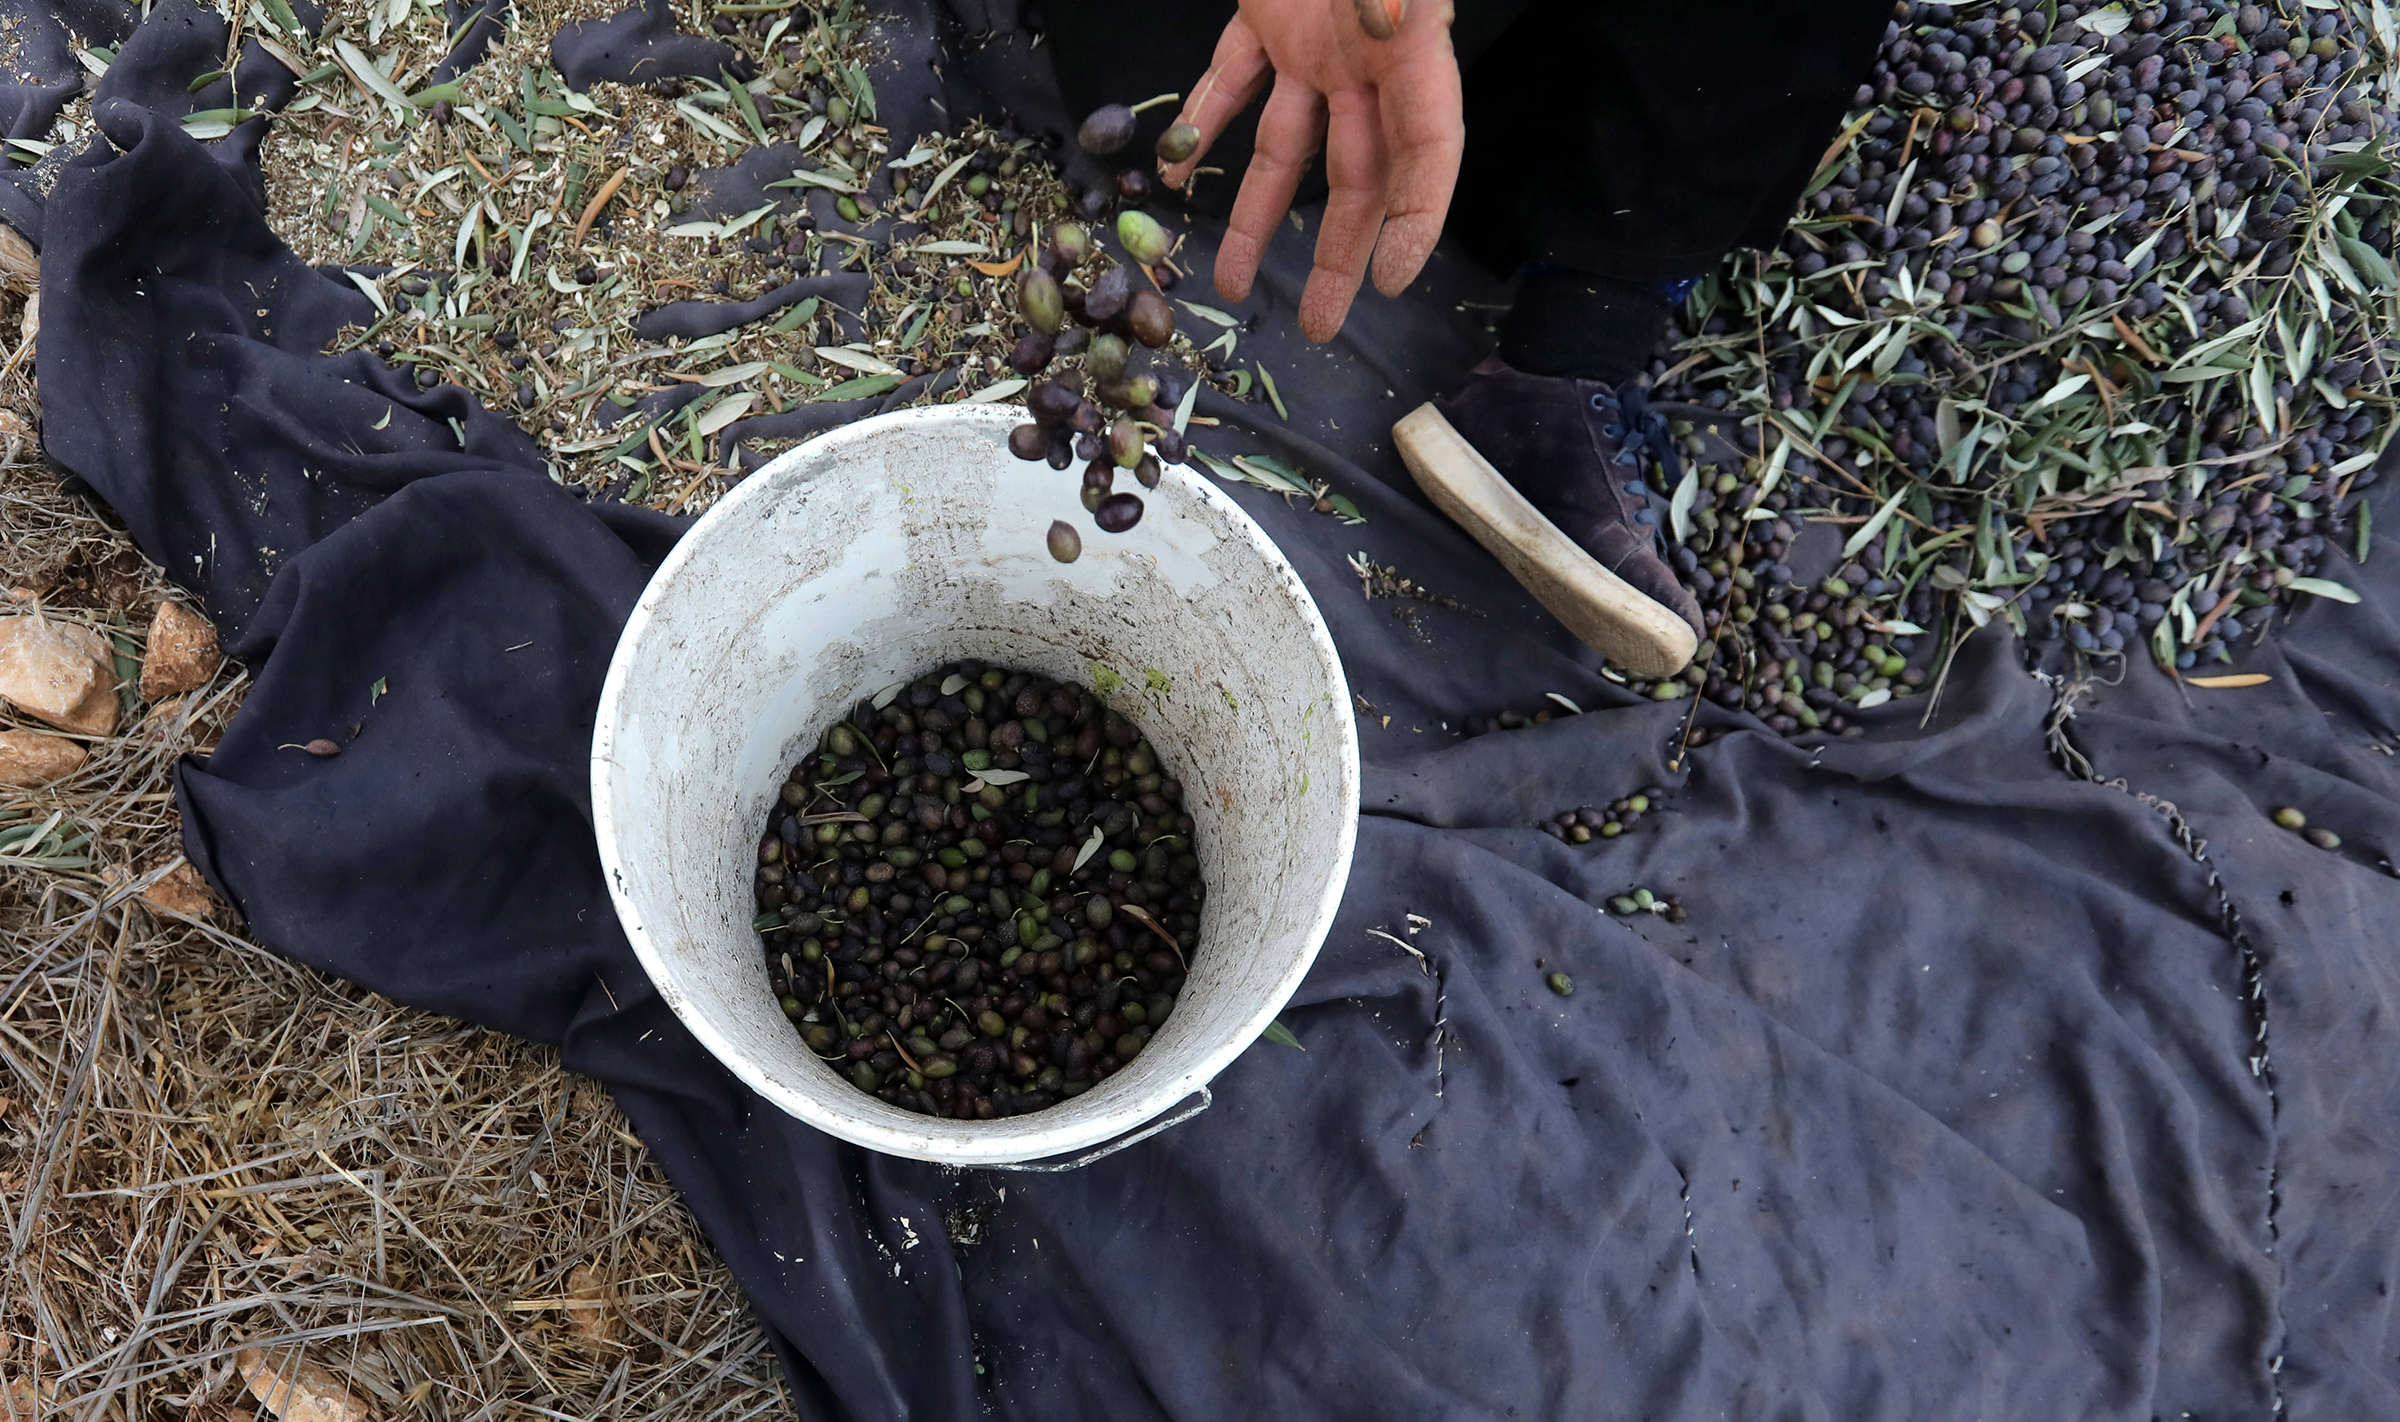 A Palestinian farmer collects olives in an olive grove on the outskirts of the West Bank village of Raba, near the city of Jenin, on Oct. 19, 2019. (Alaa Badarneh—EPA-EFE/Shutterstock)